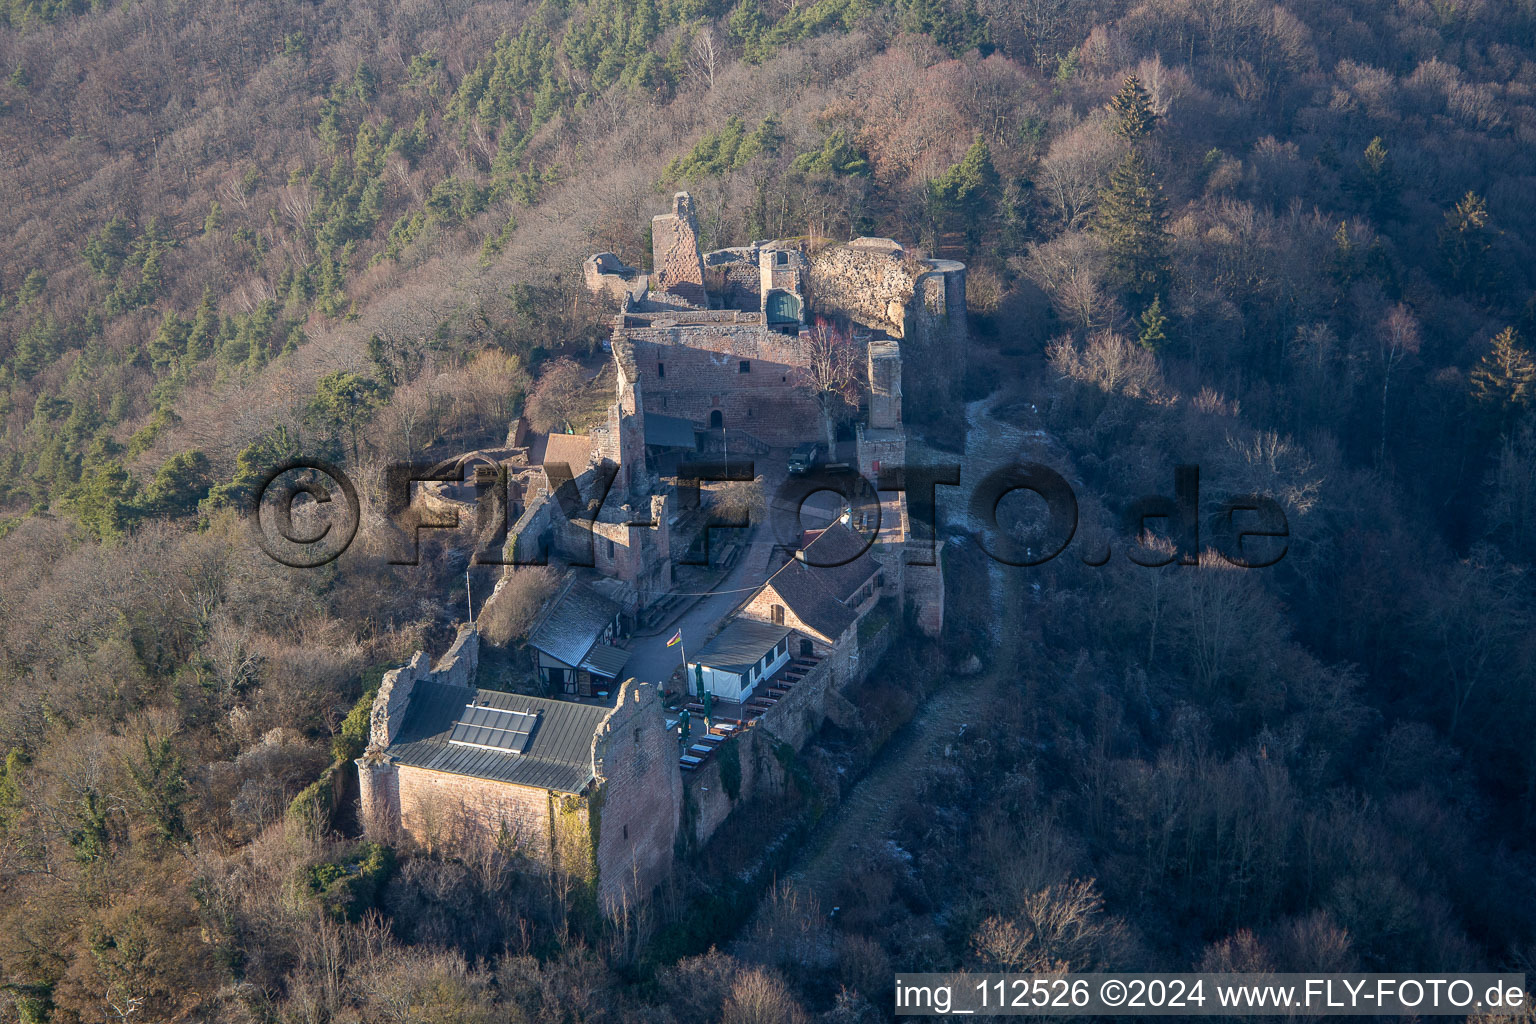 Ruins and vestiges of the former castle and fortress Burgruine Madenburg in Eschbach in the state Rhineland-Palatinate